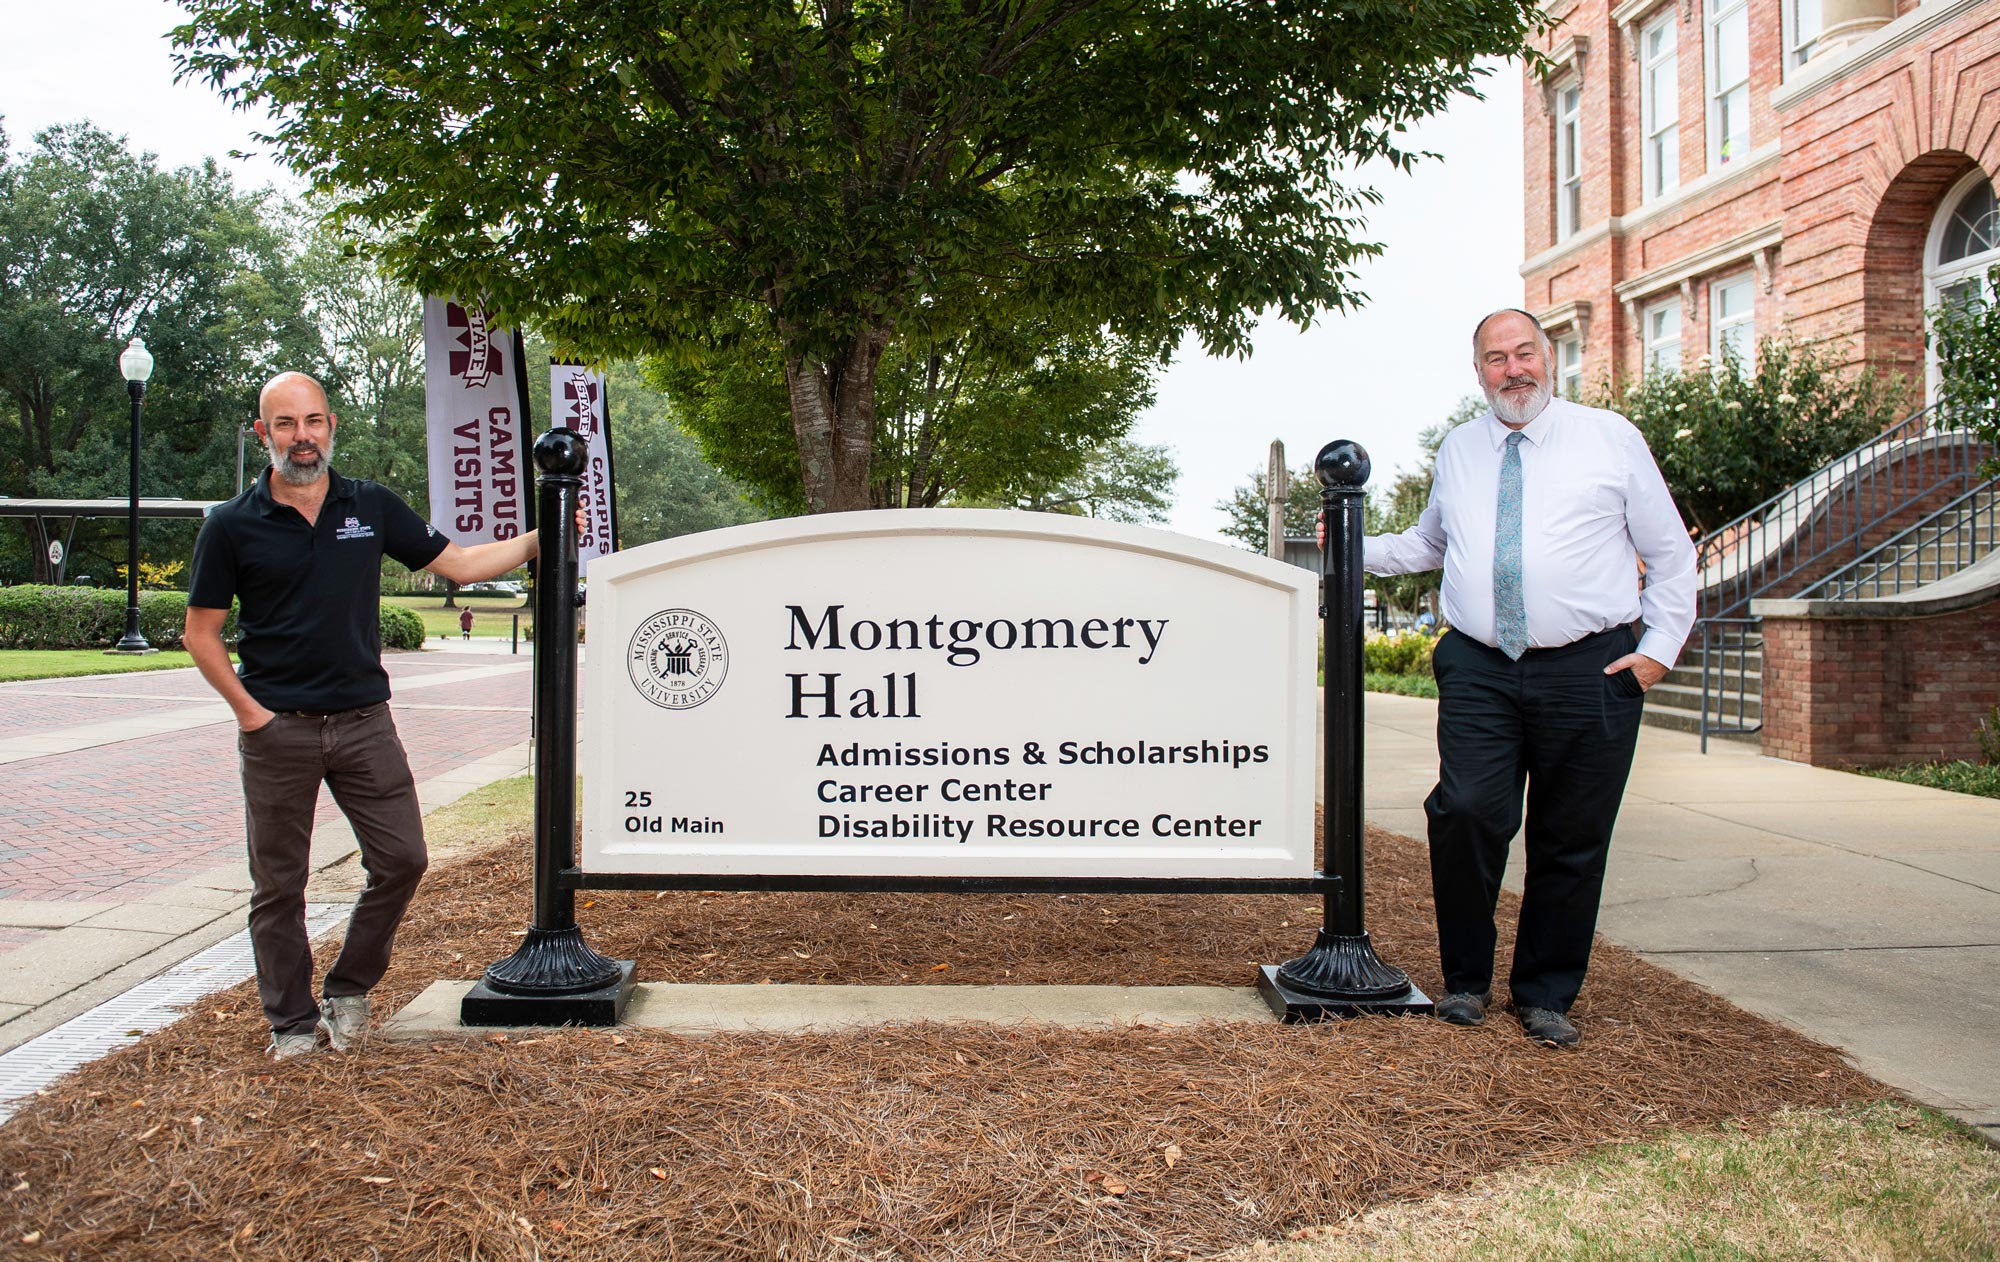 Two men standing in front of a sign that says mongomery hall.